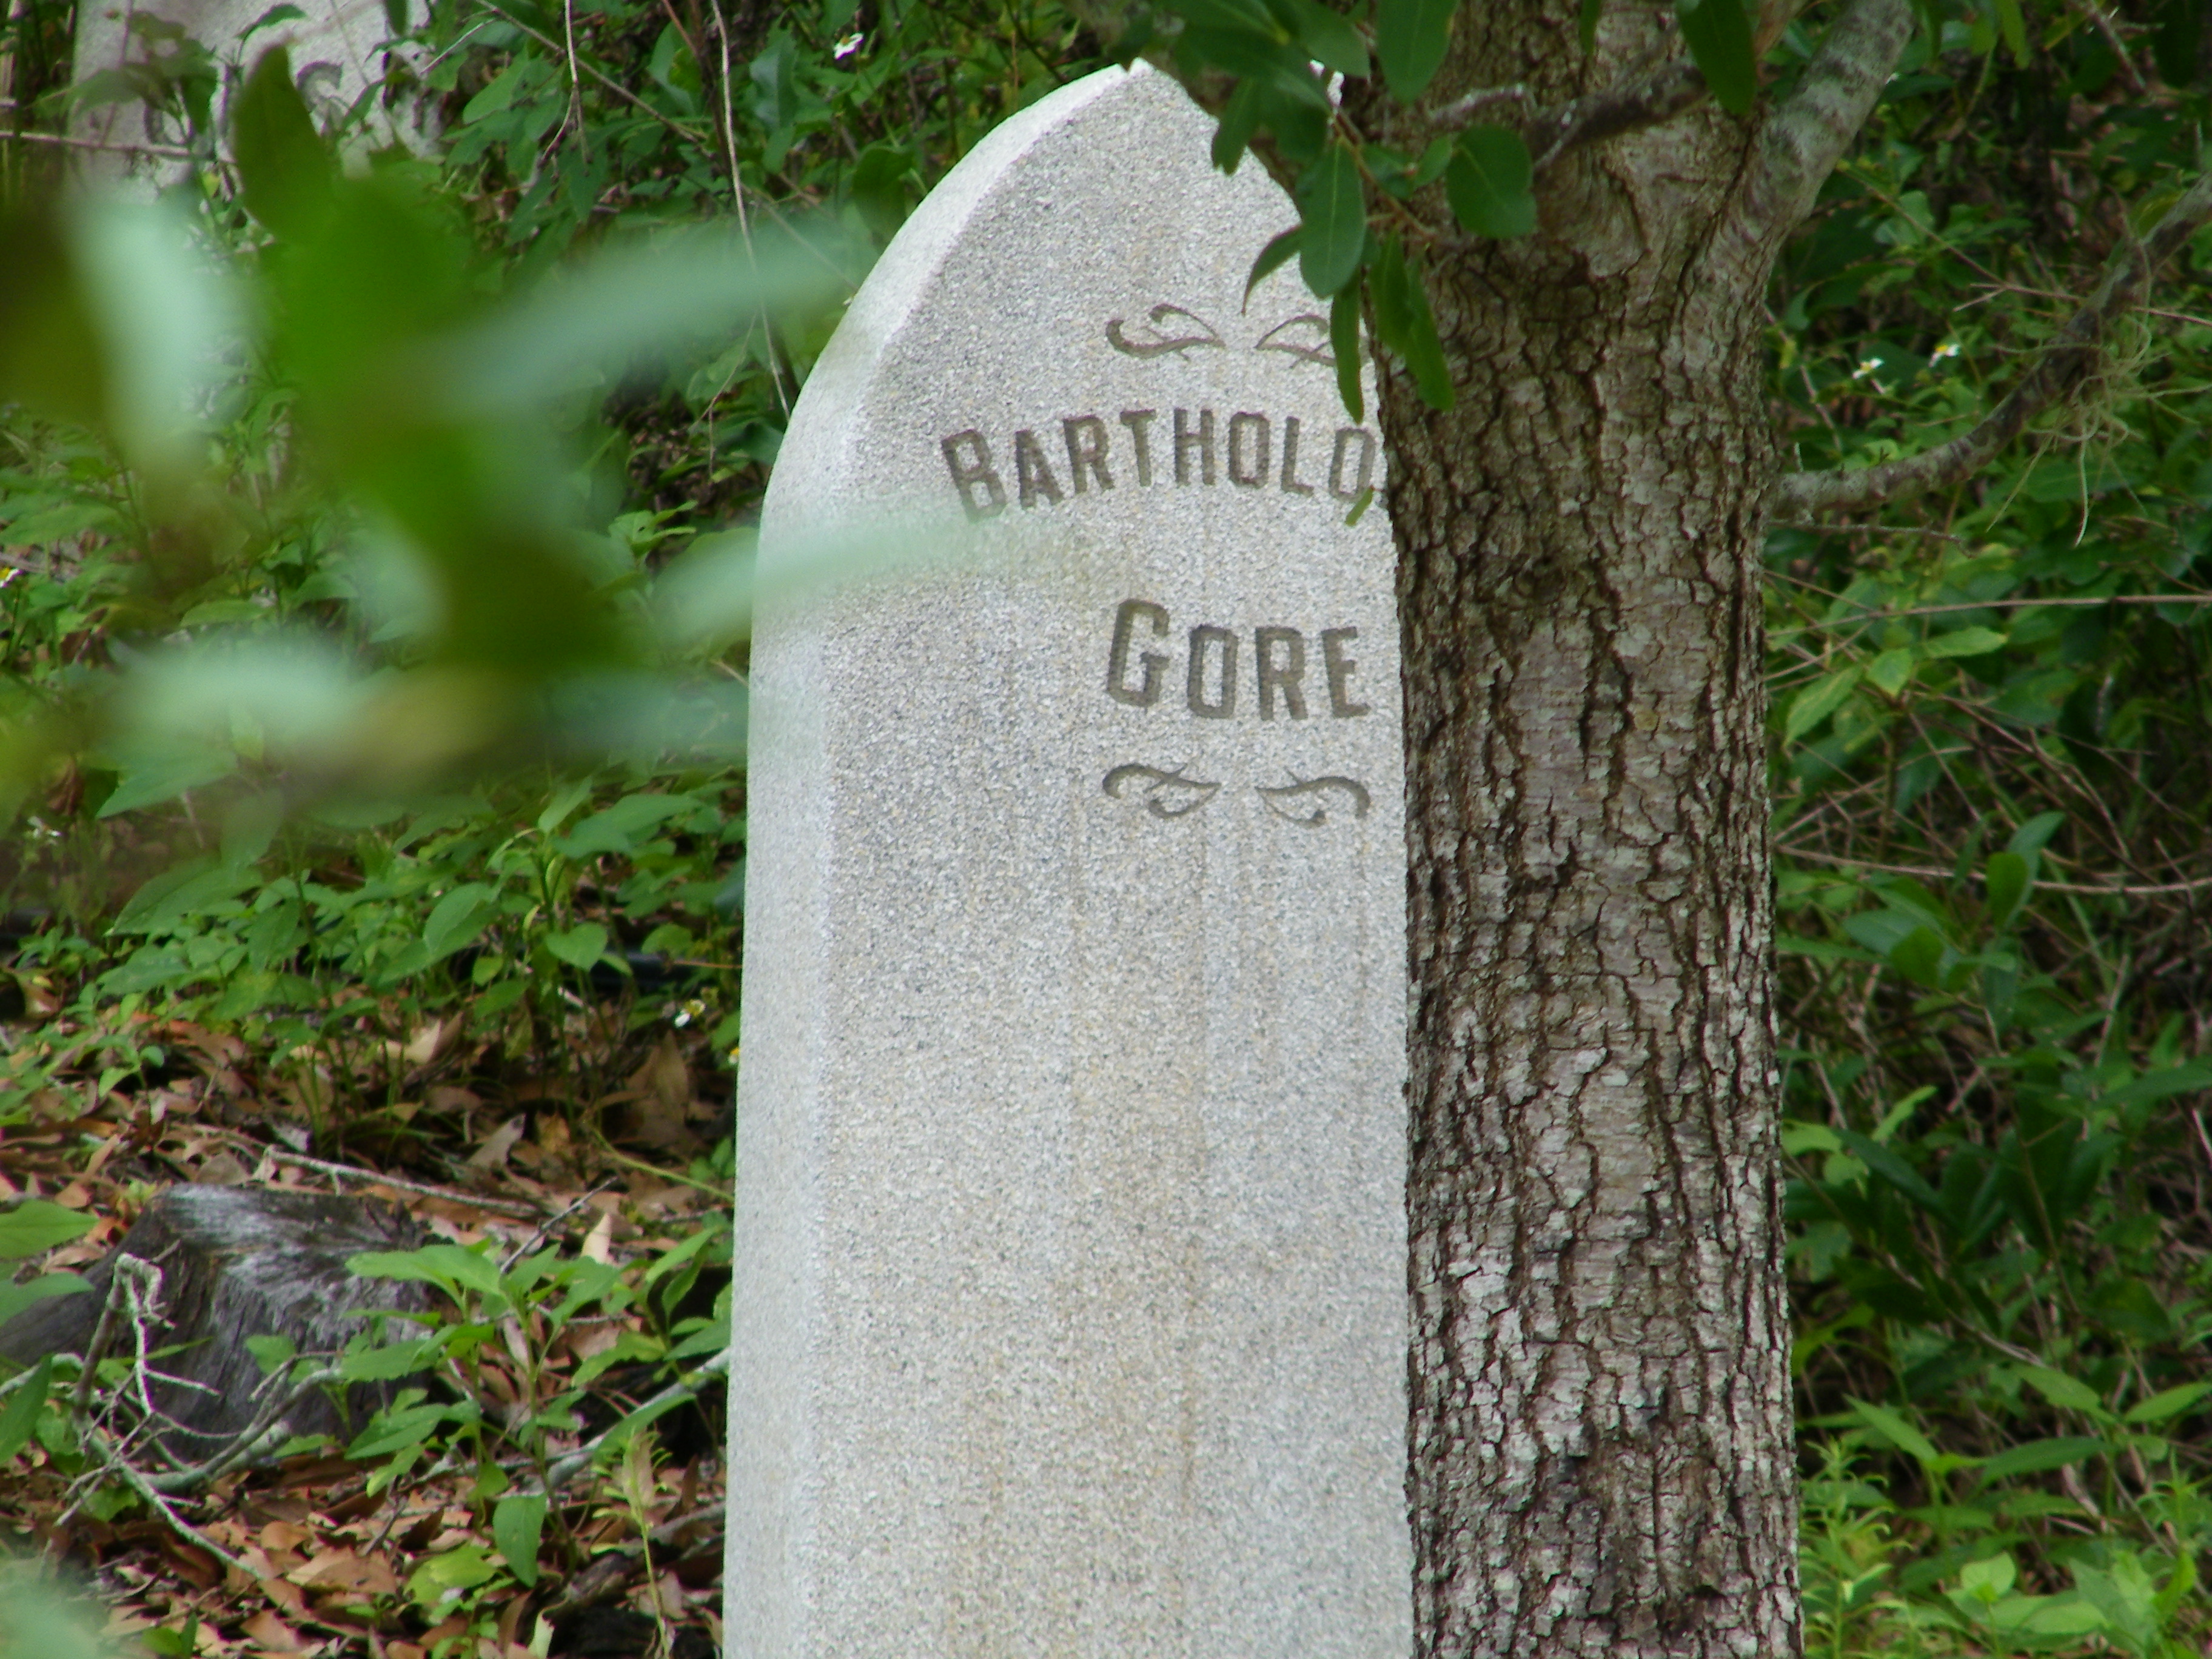 The Tomb of Bartholomew Gore as seen at Walt Disney Worlds Haunted Mansion. From early concept of a Pirate in the Mansion